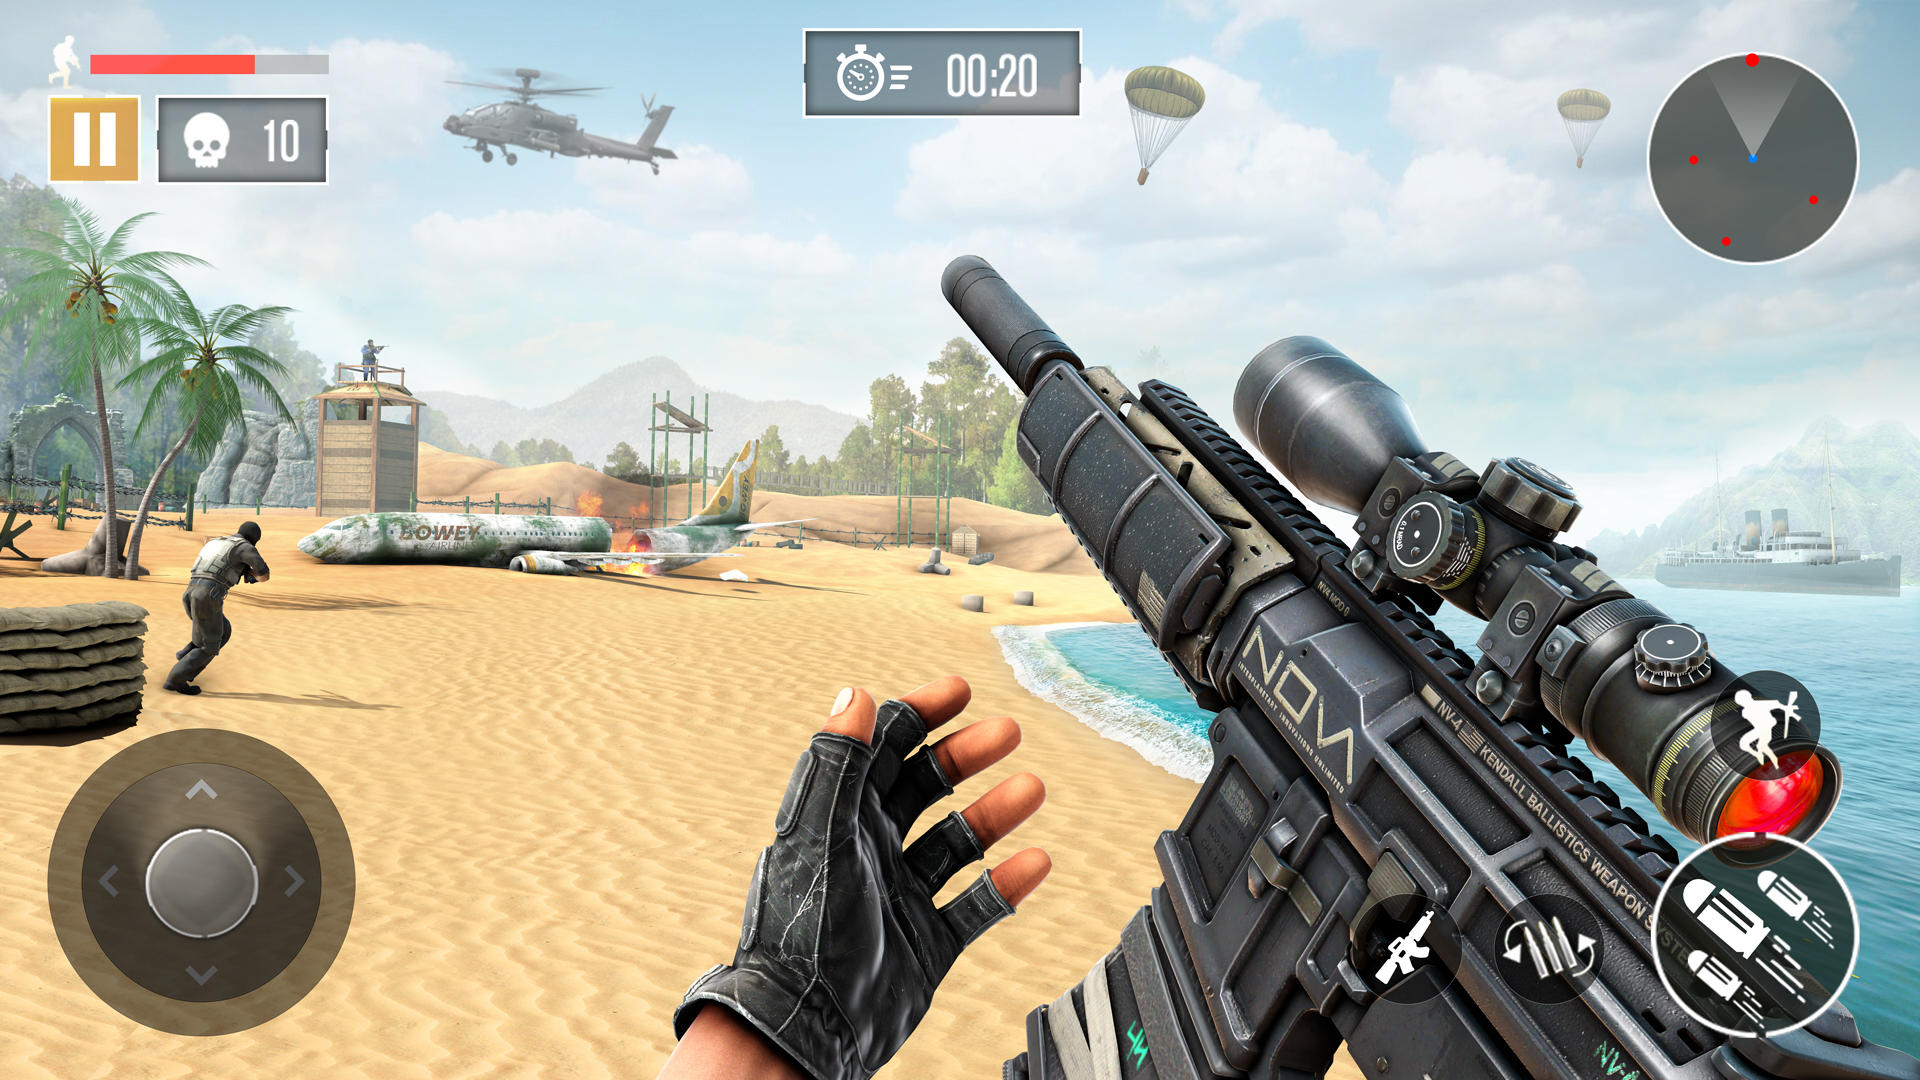 Real Sniper Strike Force FPS Gun Shooting Games: Anti Terrorist Military  Commando Shooter Game::Appstore for Android